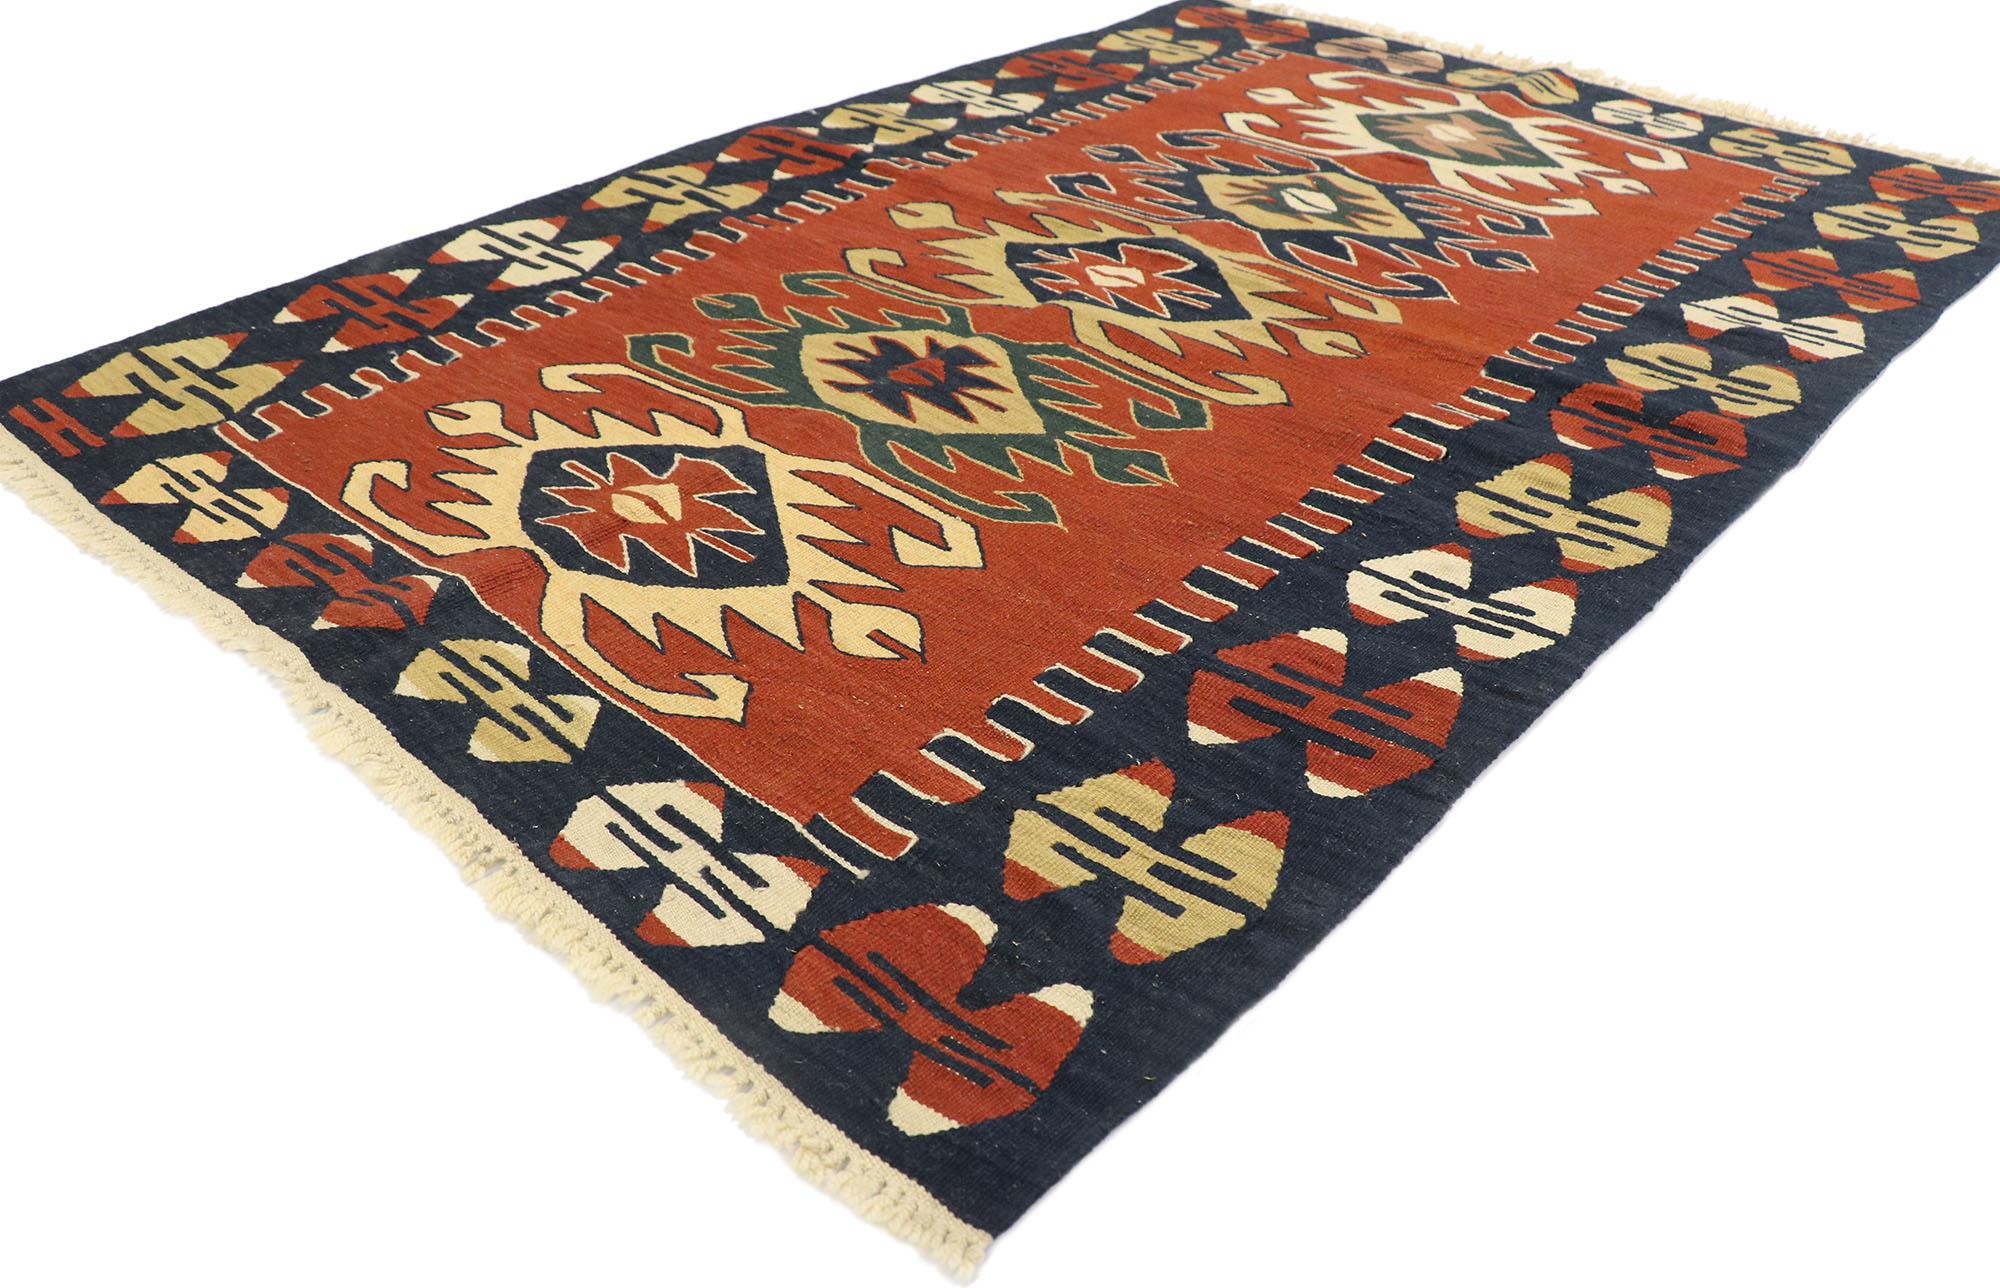 77996 Vintage Persian Shiraz Kilim rug with Tribal Style 03'09 x 05'07. Full of tiny details and a bold expressive design combined with vibrant colors and tribal style, this hand-woven wool vintage Persian Shiraz kilim rug is a captivating vision of